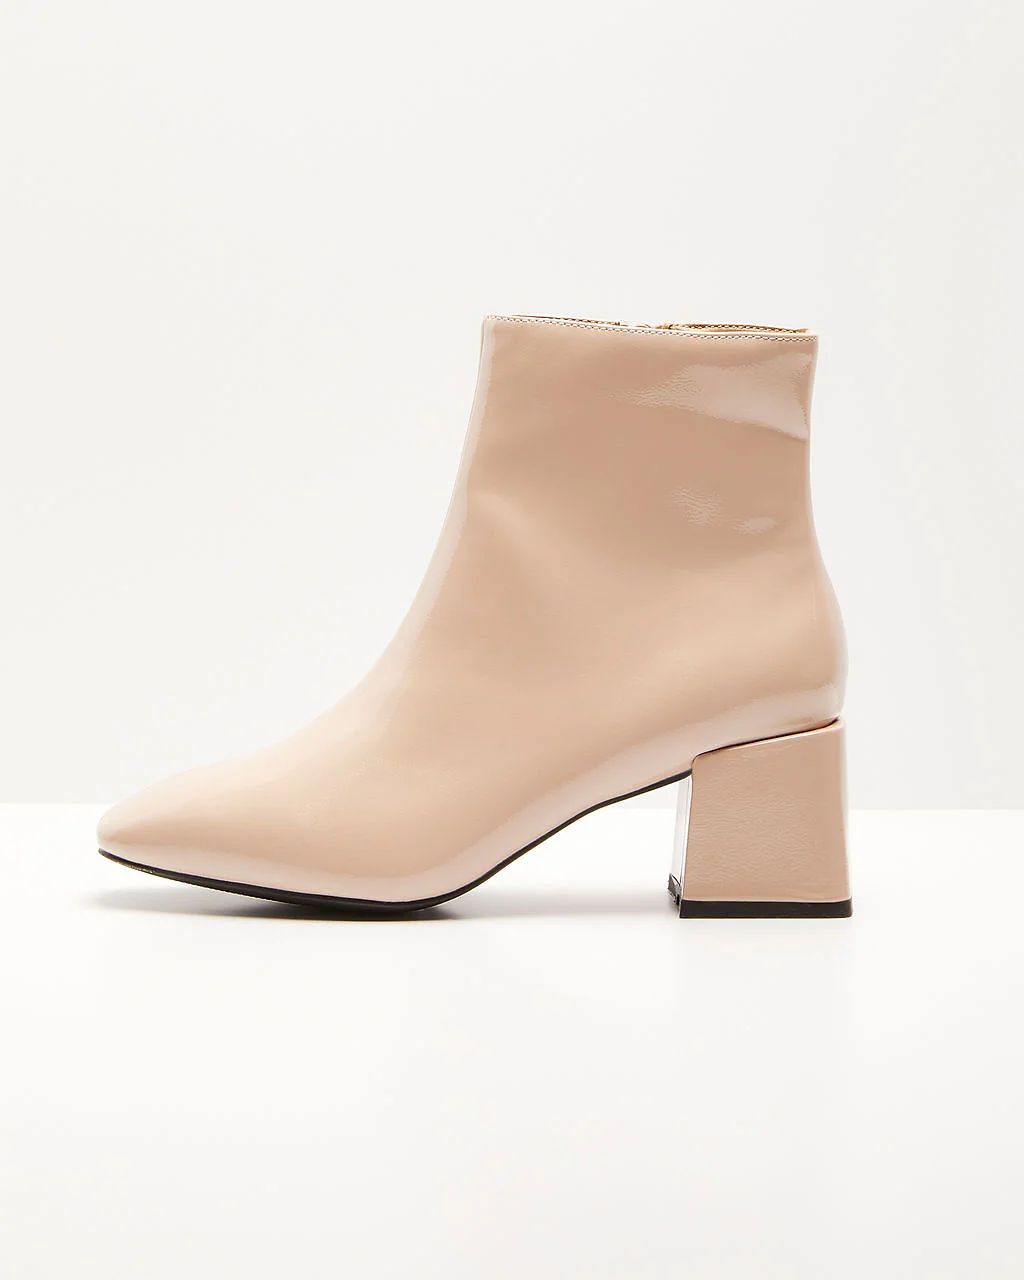 Kelce Patent Faux Leather Ankle Booties | VICI Collection